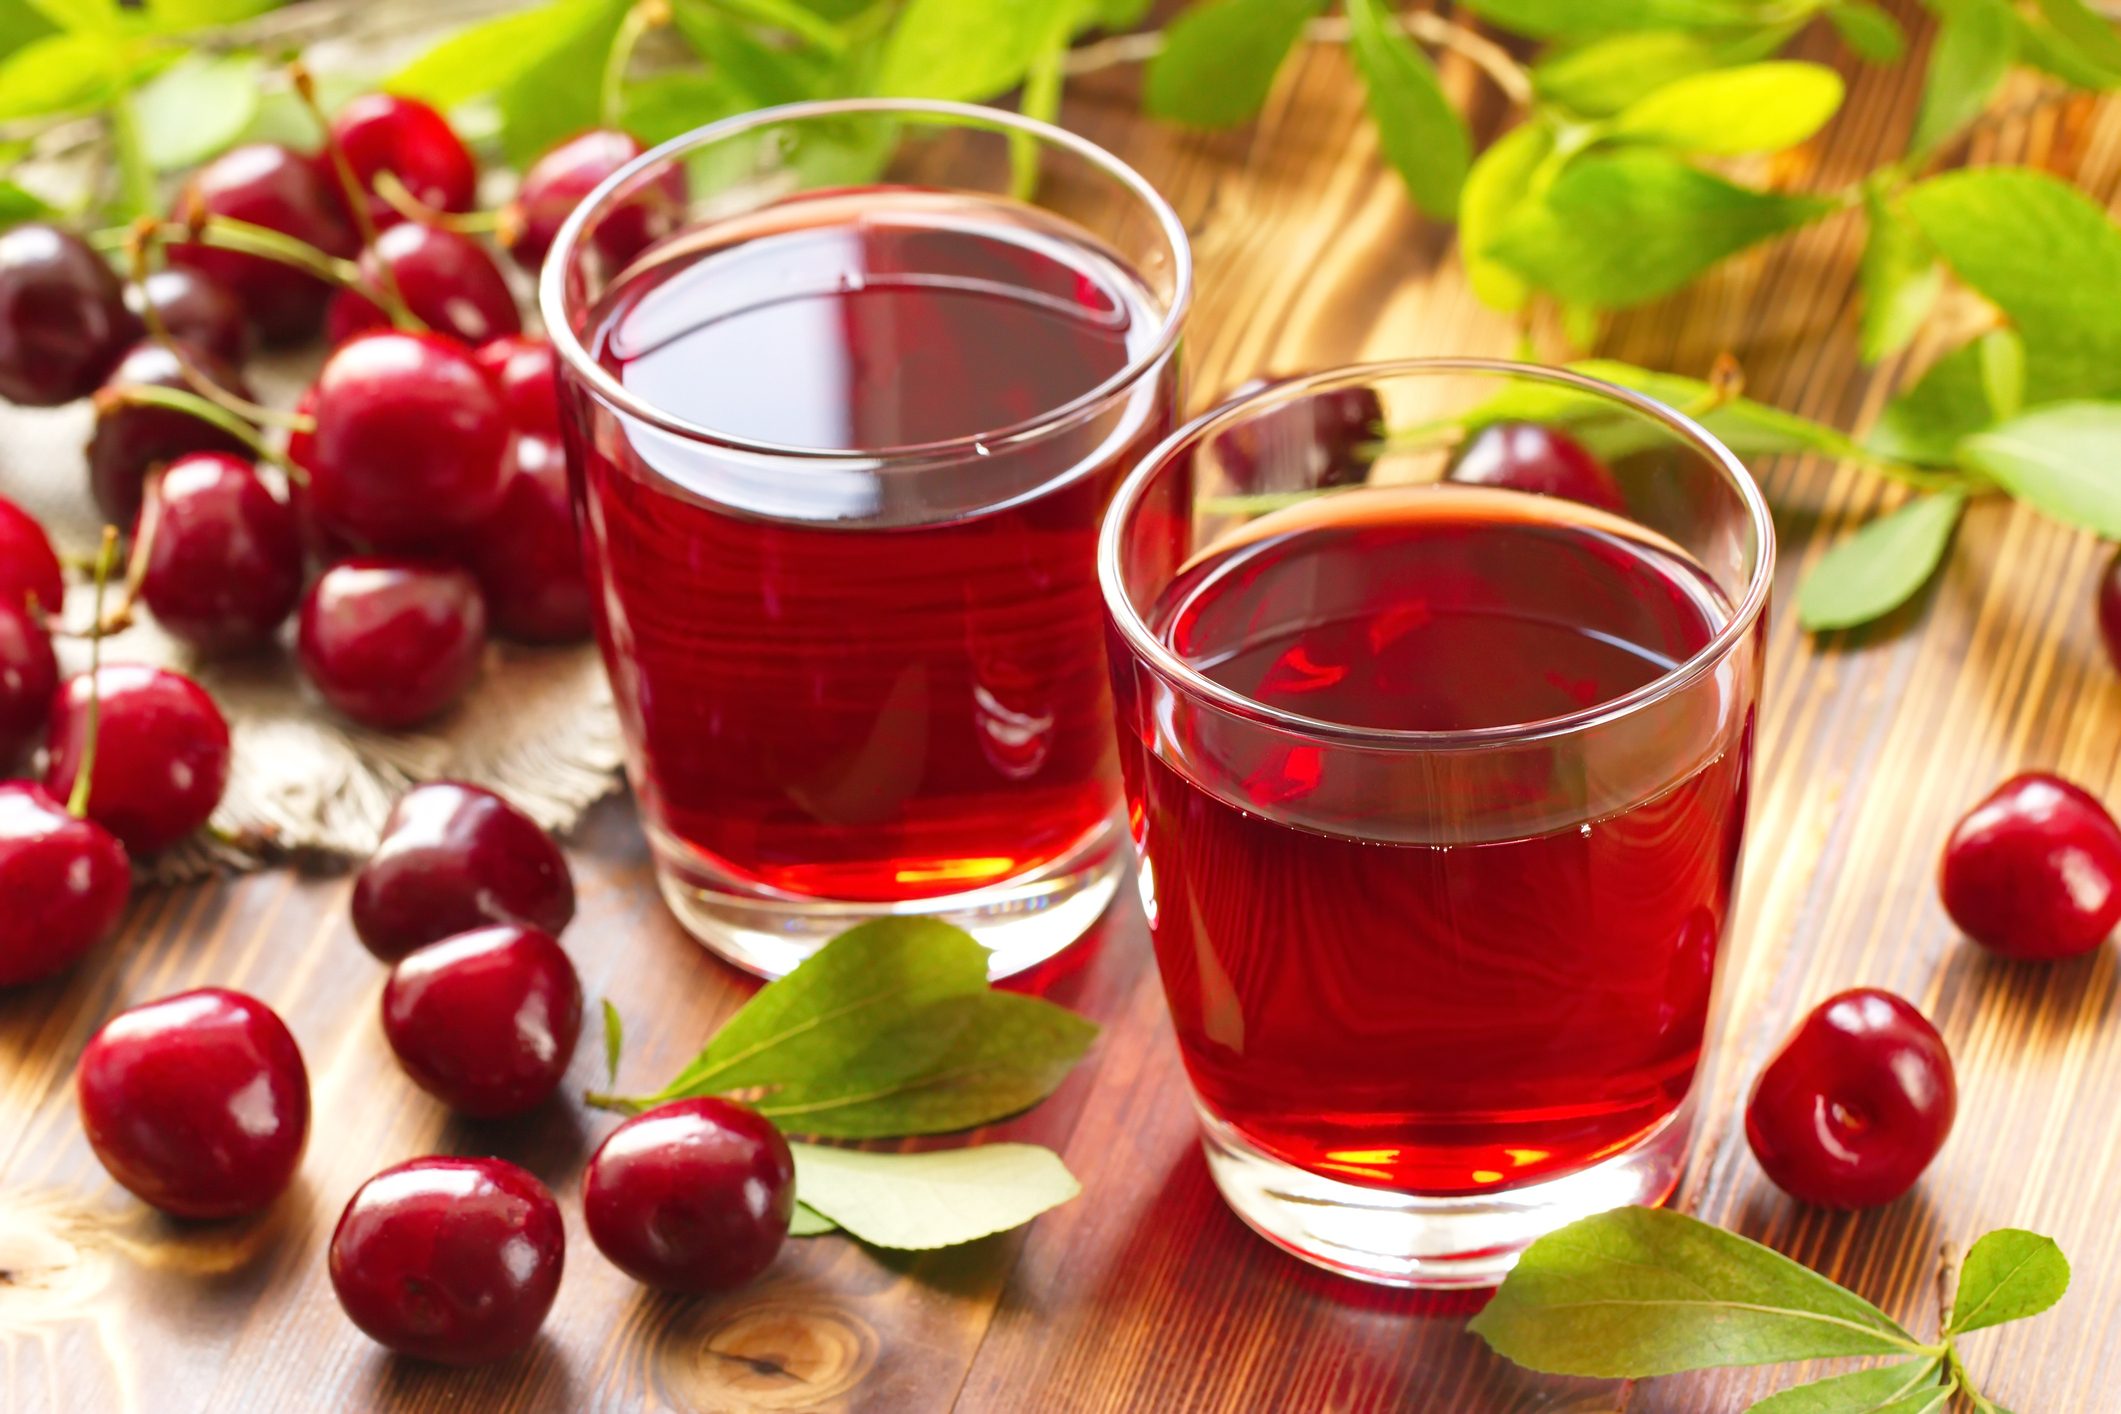 Tart Cherry Juice for Insomnia Is the Internet's Latest Viral Trend—But Does It Work?